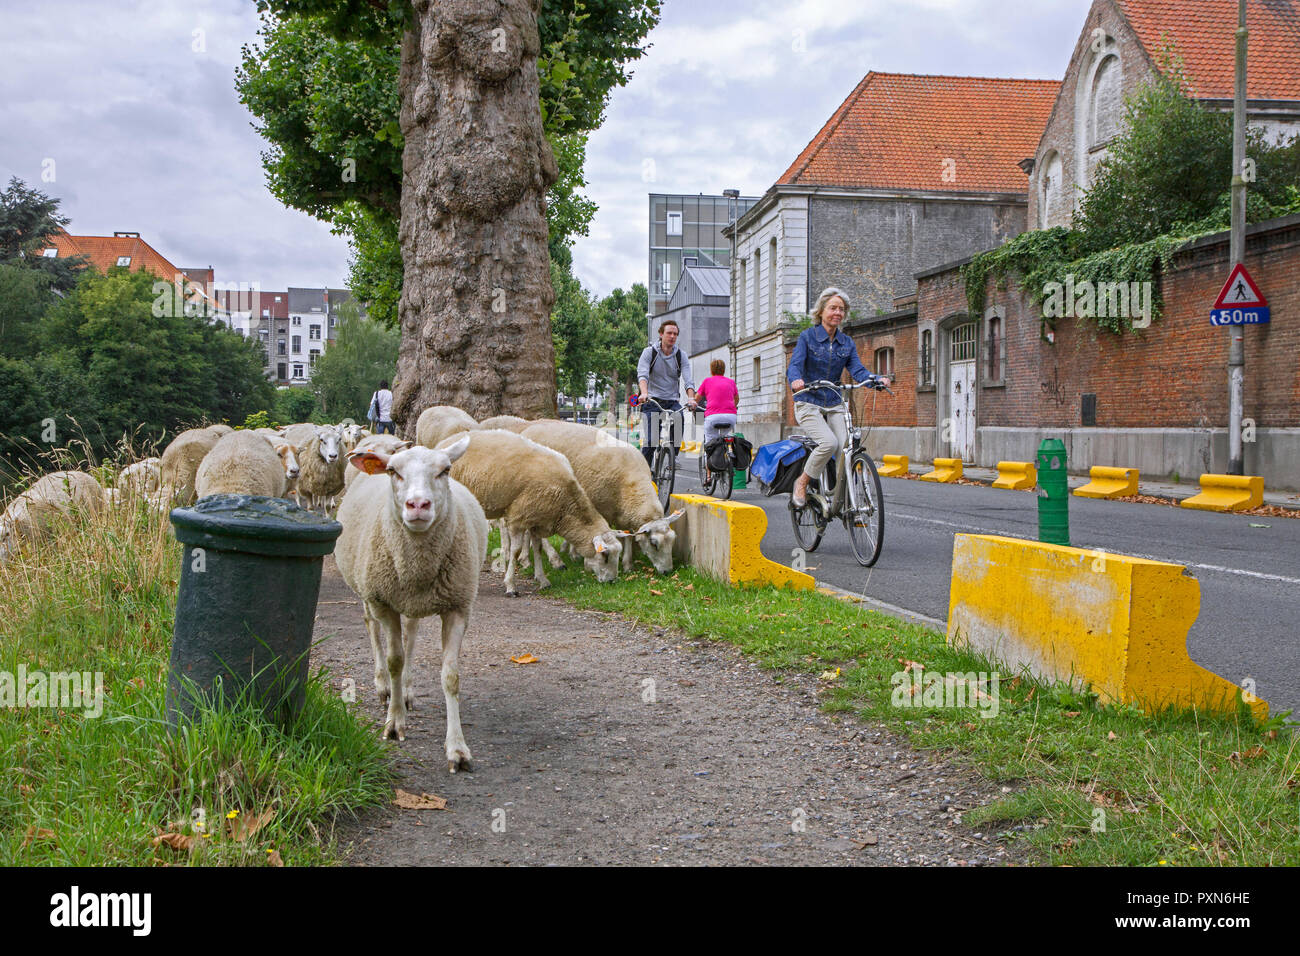 Shepherd herding flock of sheep along street to graze grass from steep canal banks in the city Ghent / Gent, Flanders, Belgium Stock Photo